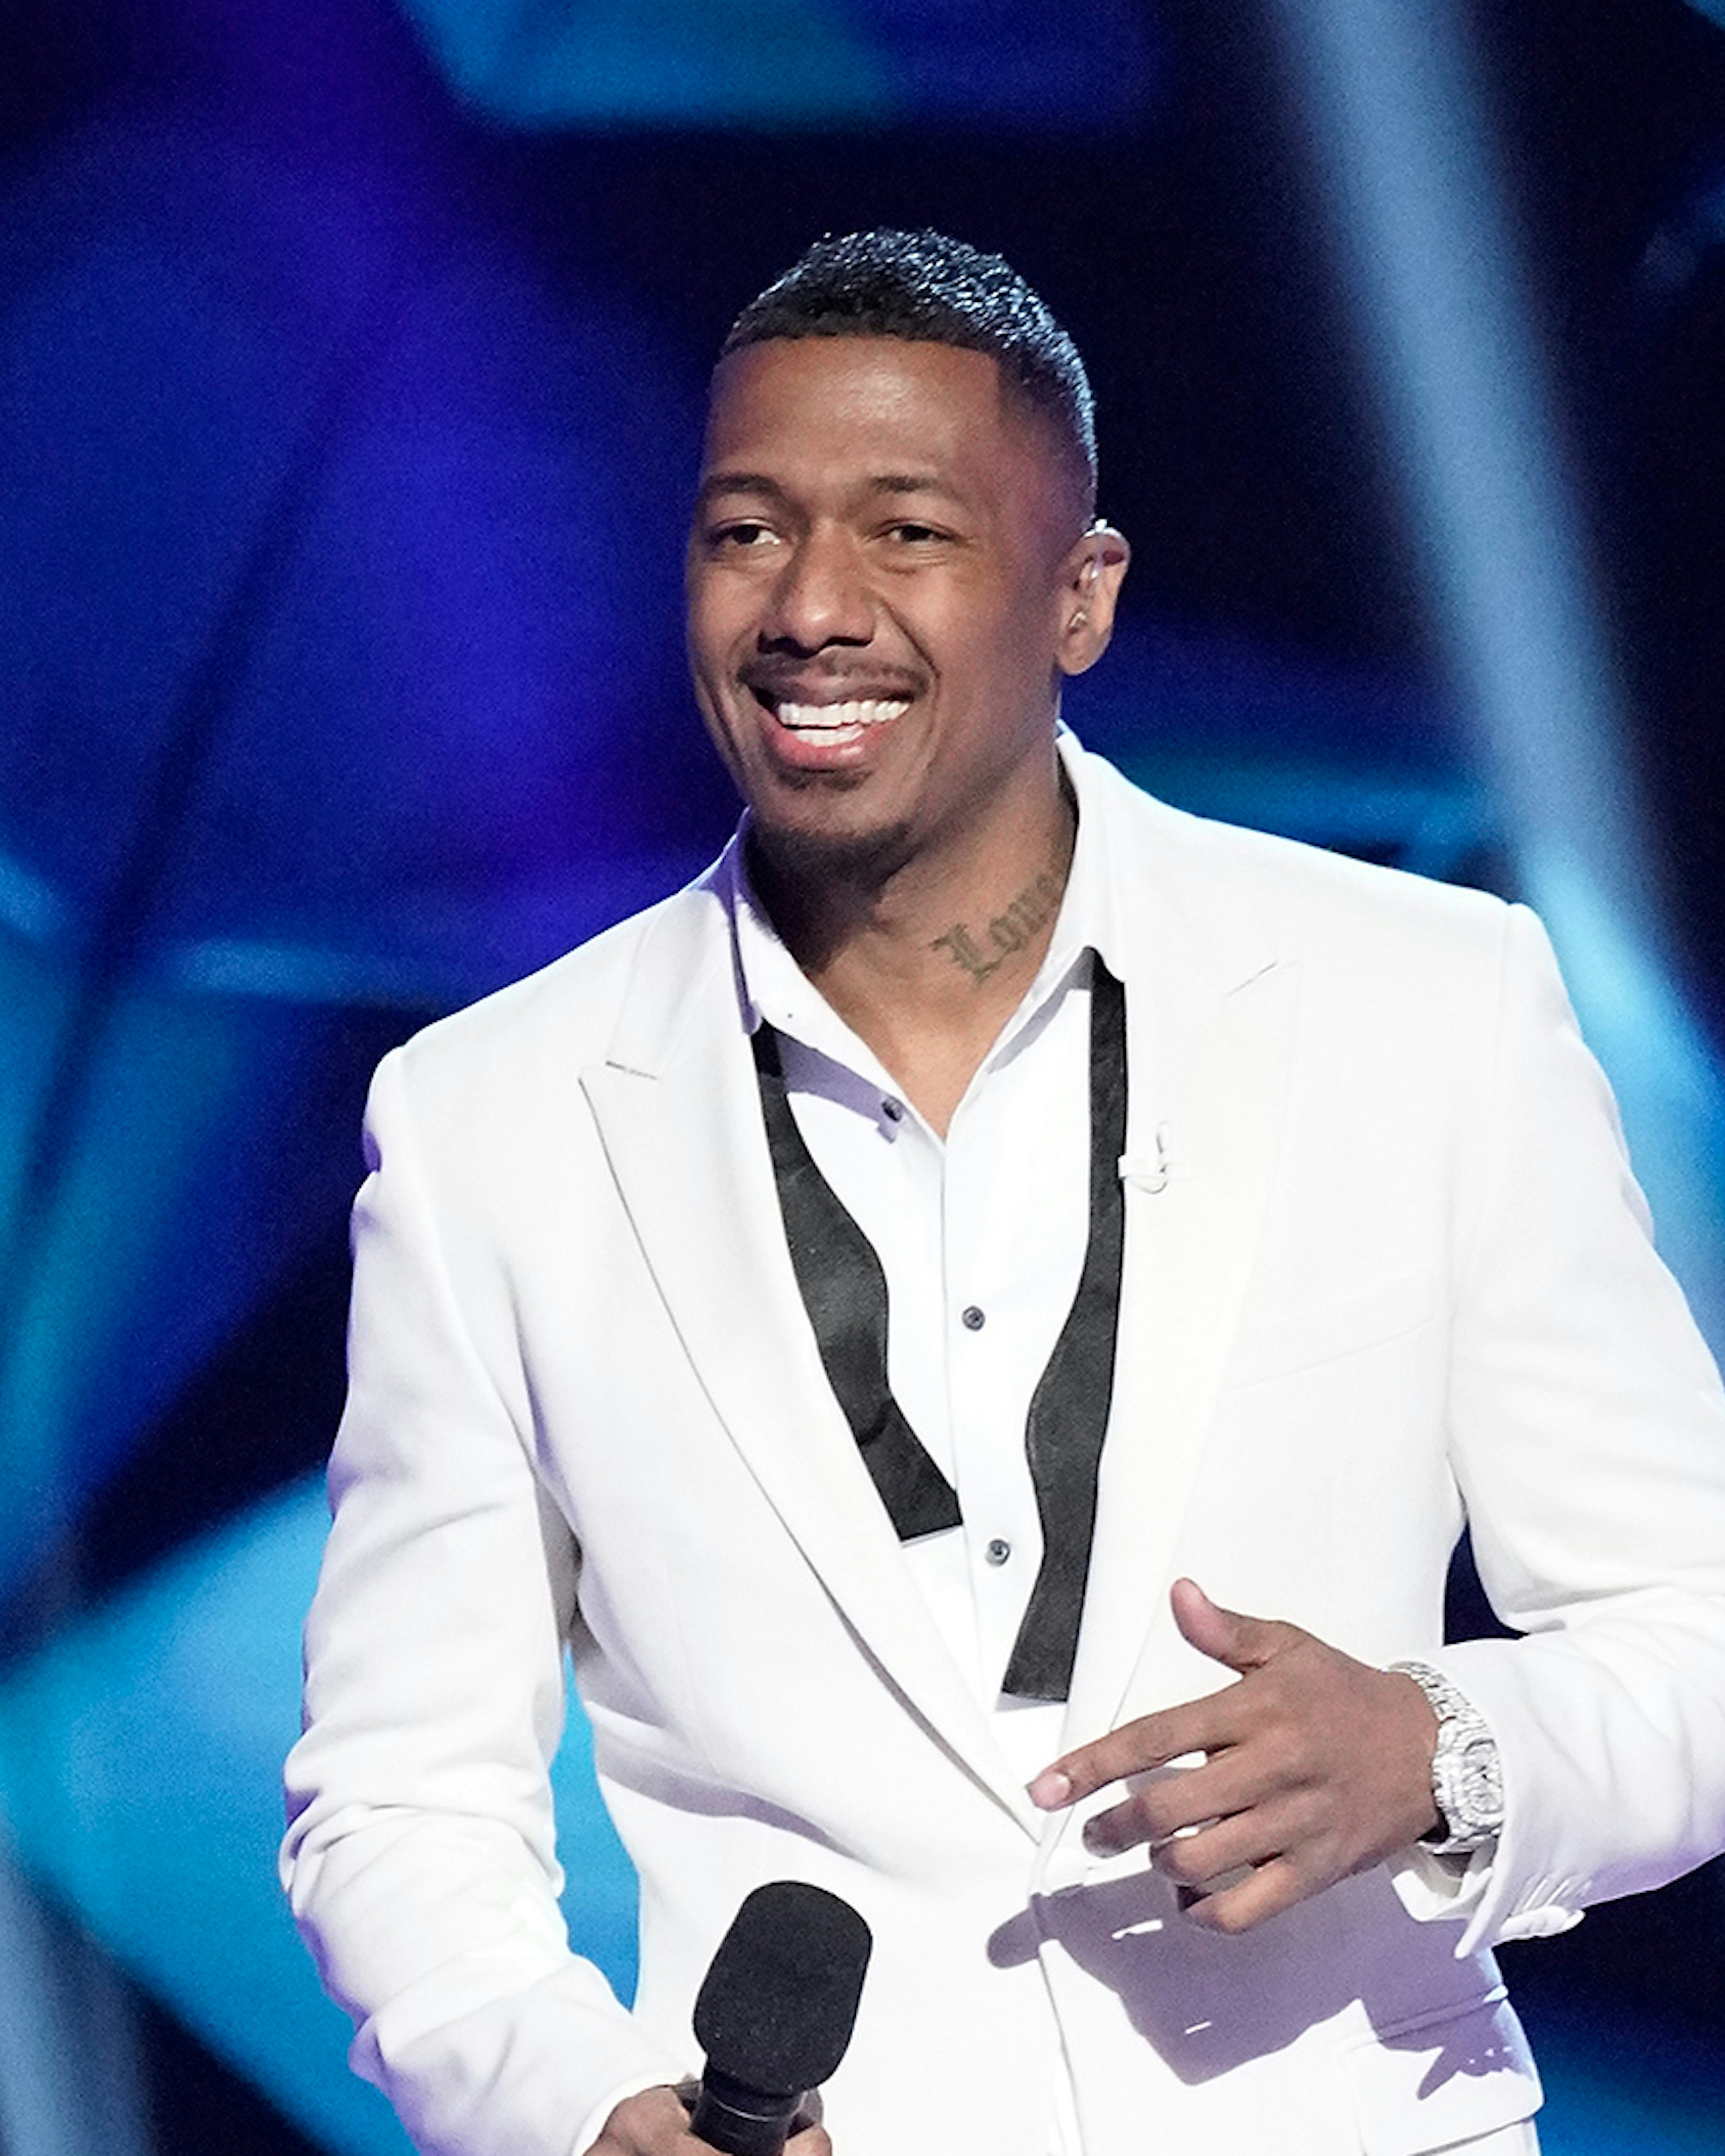 Host Nick Cannon in the Old Friends, New Clues: Group C Championships episode of THE MASKED SINGER airing Wednesday, March 25 (8:00-9:01 PM ET/PT) on FOX. (Photo by FOX via Getty Images)